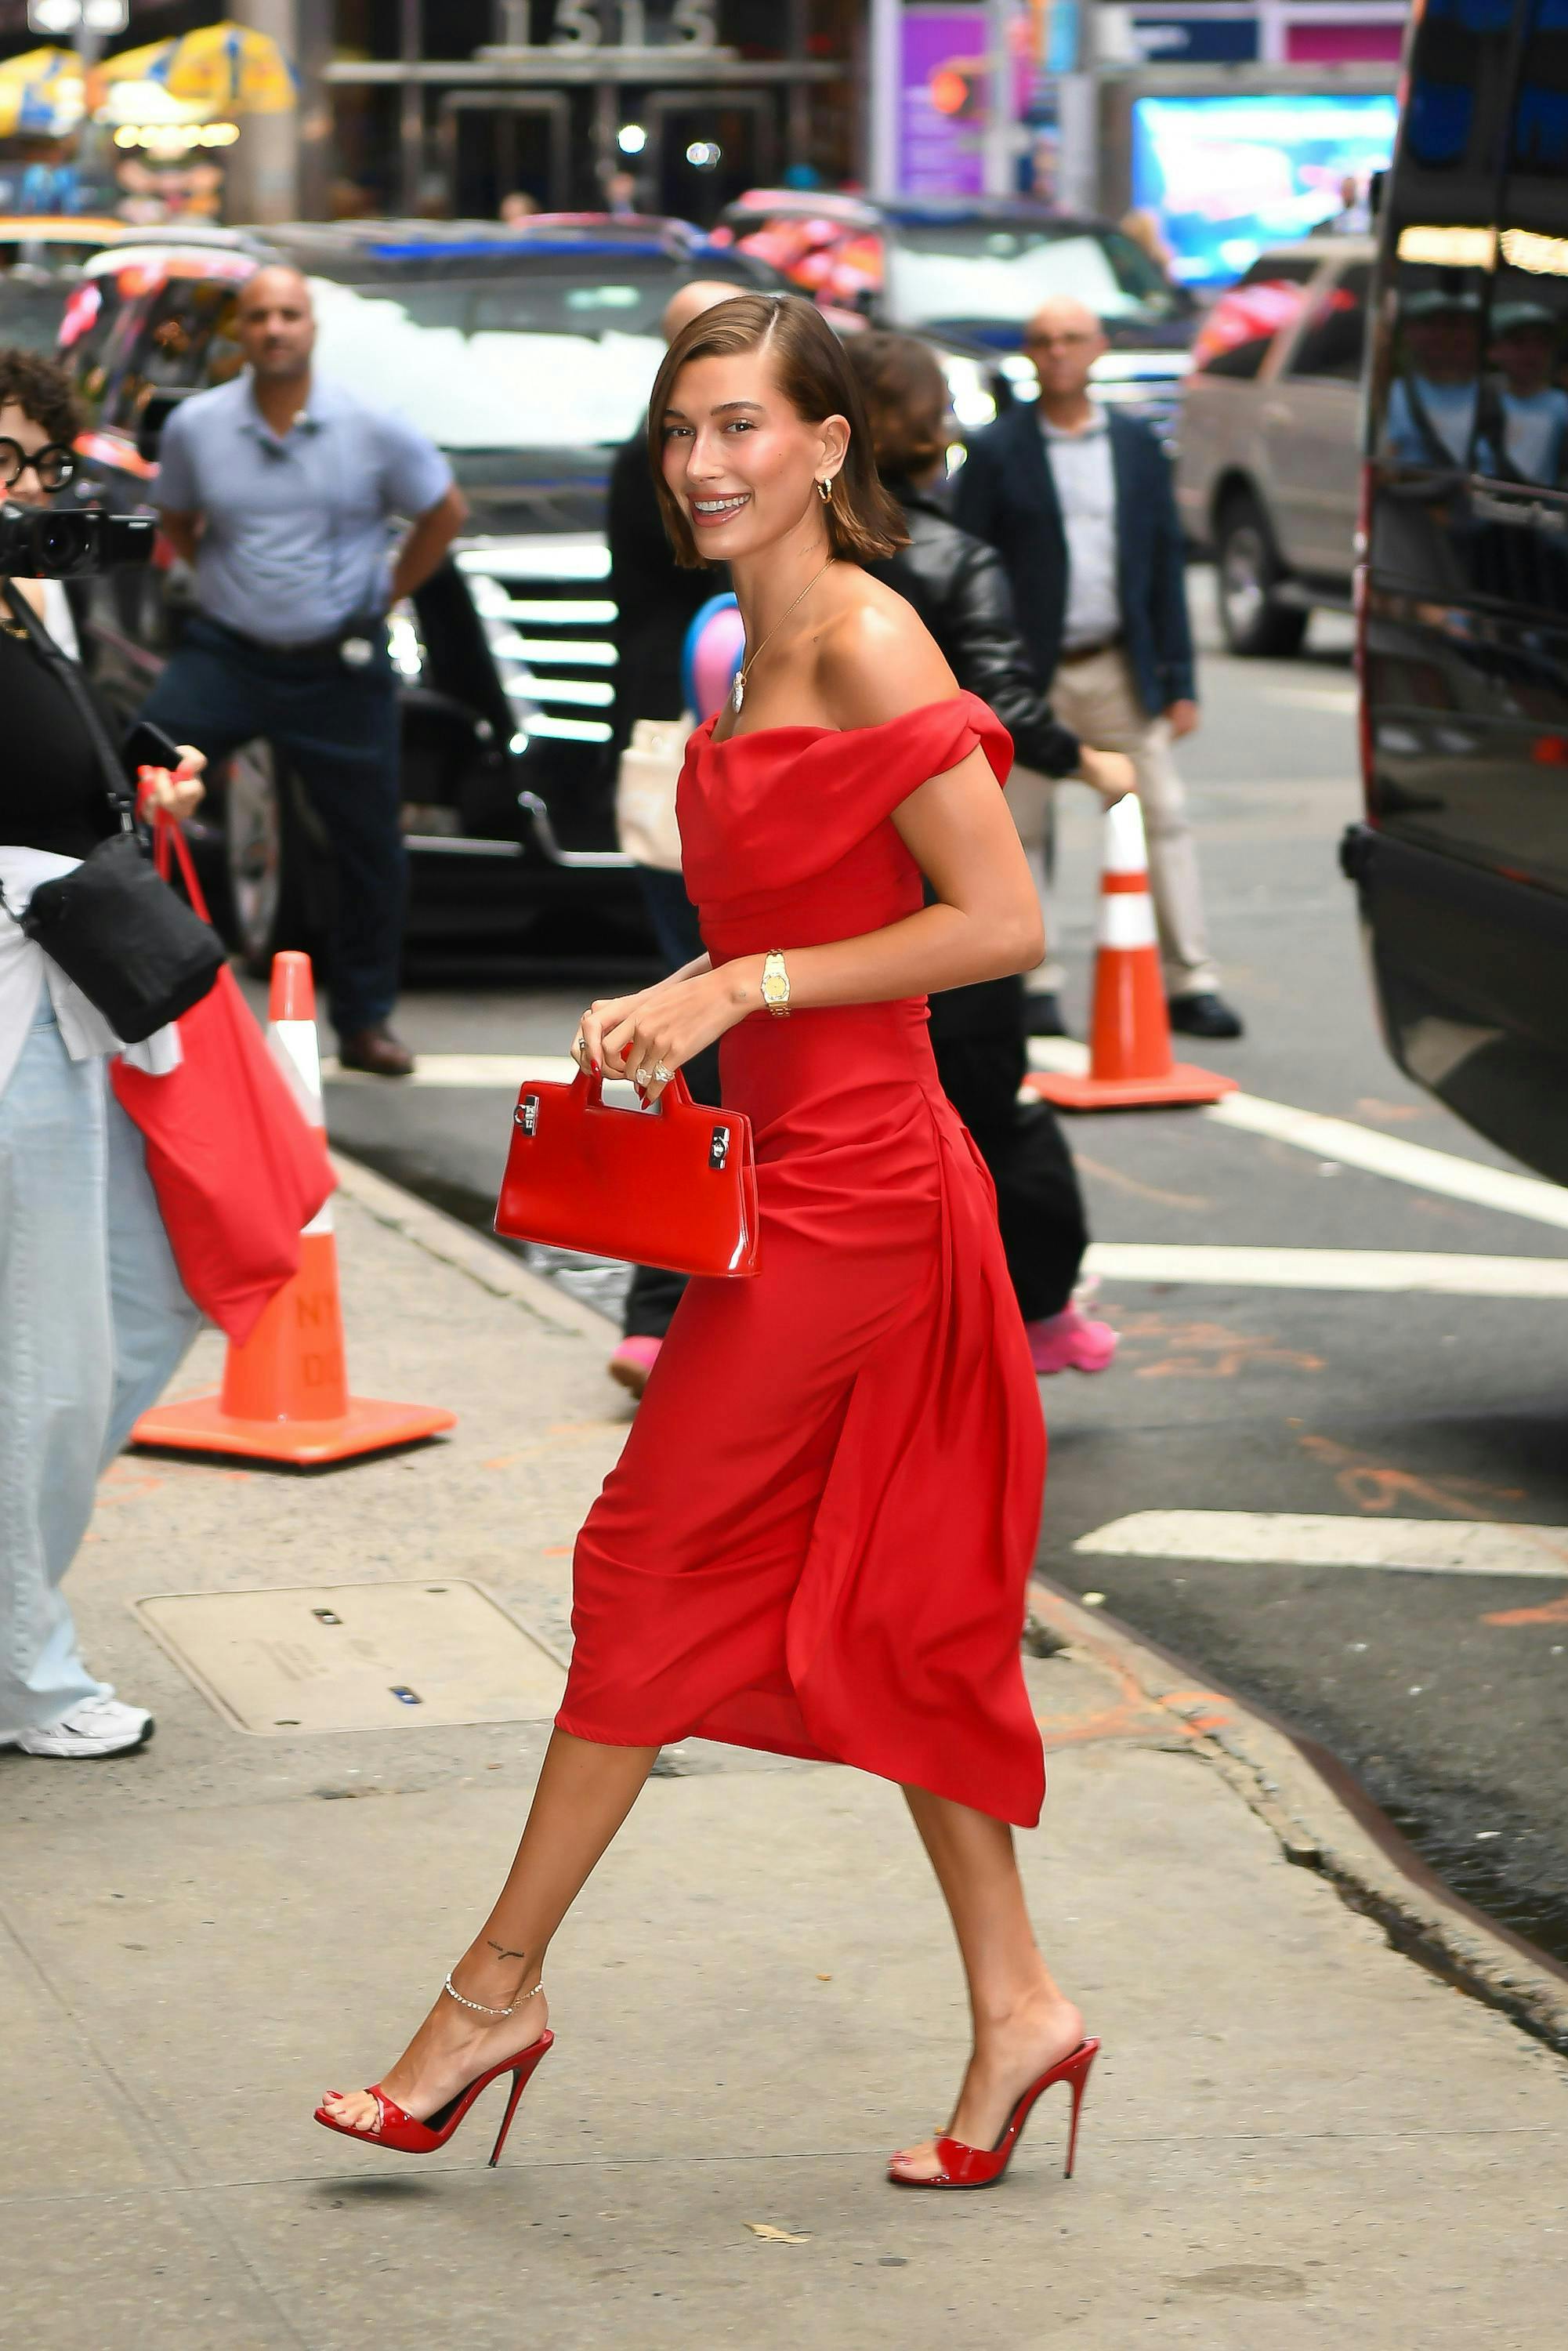 Hailey Bieber spotted in a red dress and red heels wearing an anklet.